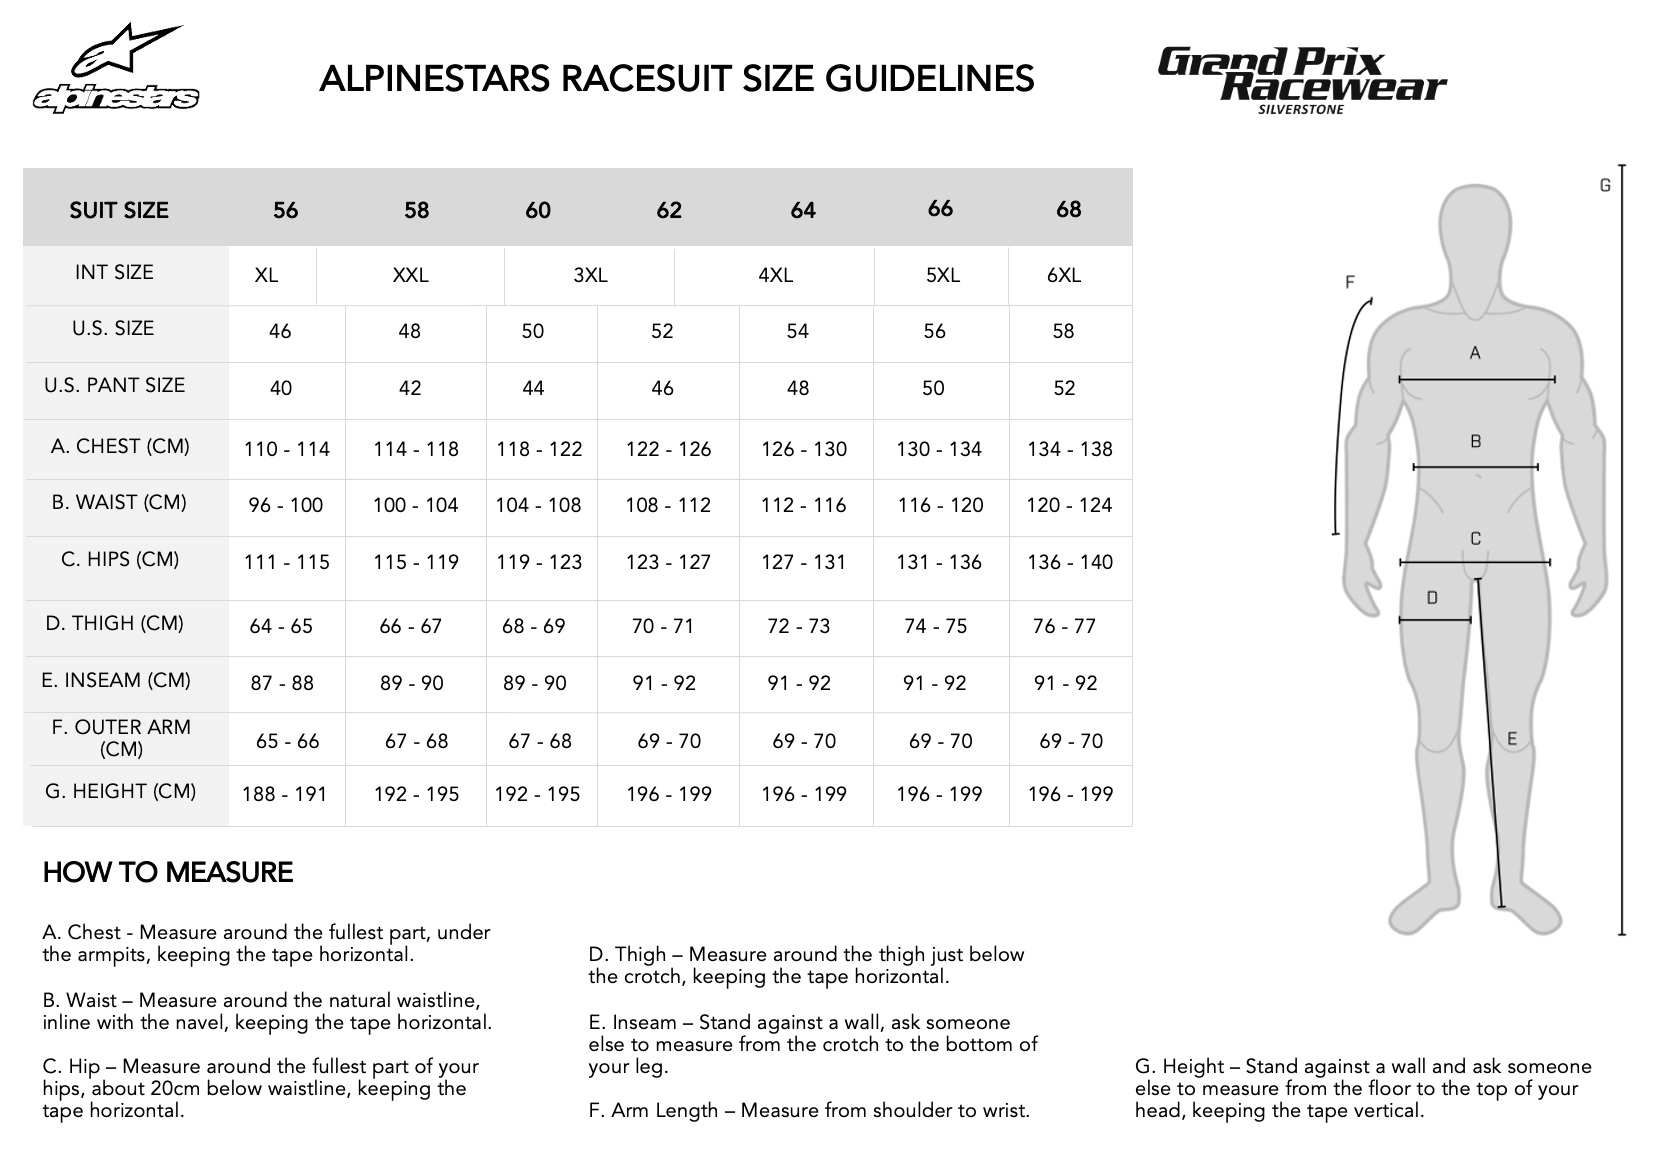 Size guide for Adult Alpinestars Race Suits available from www.gprdirect.com